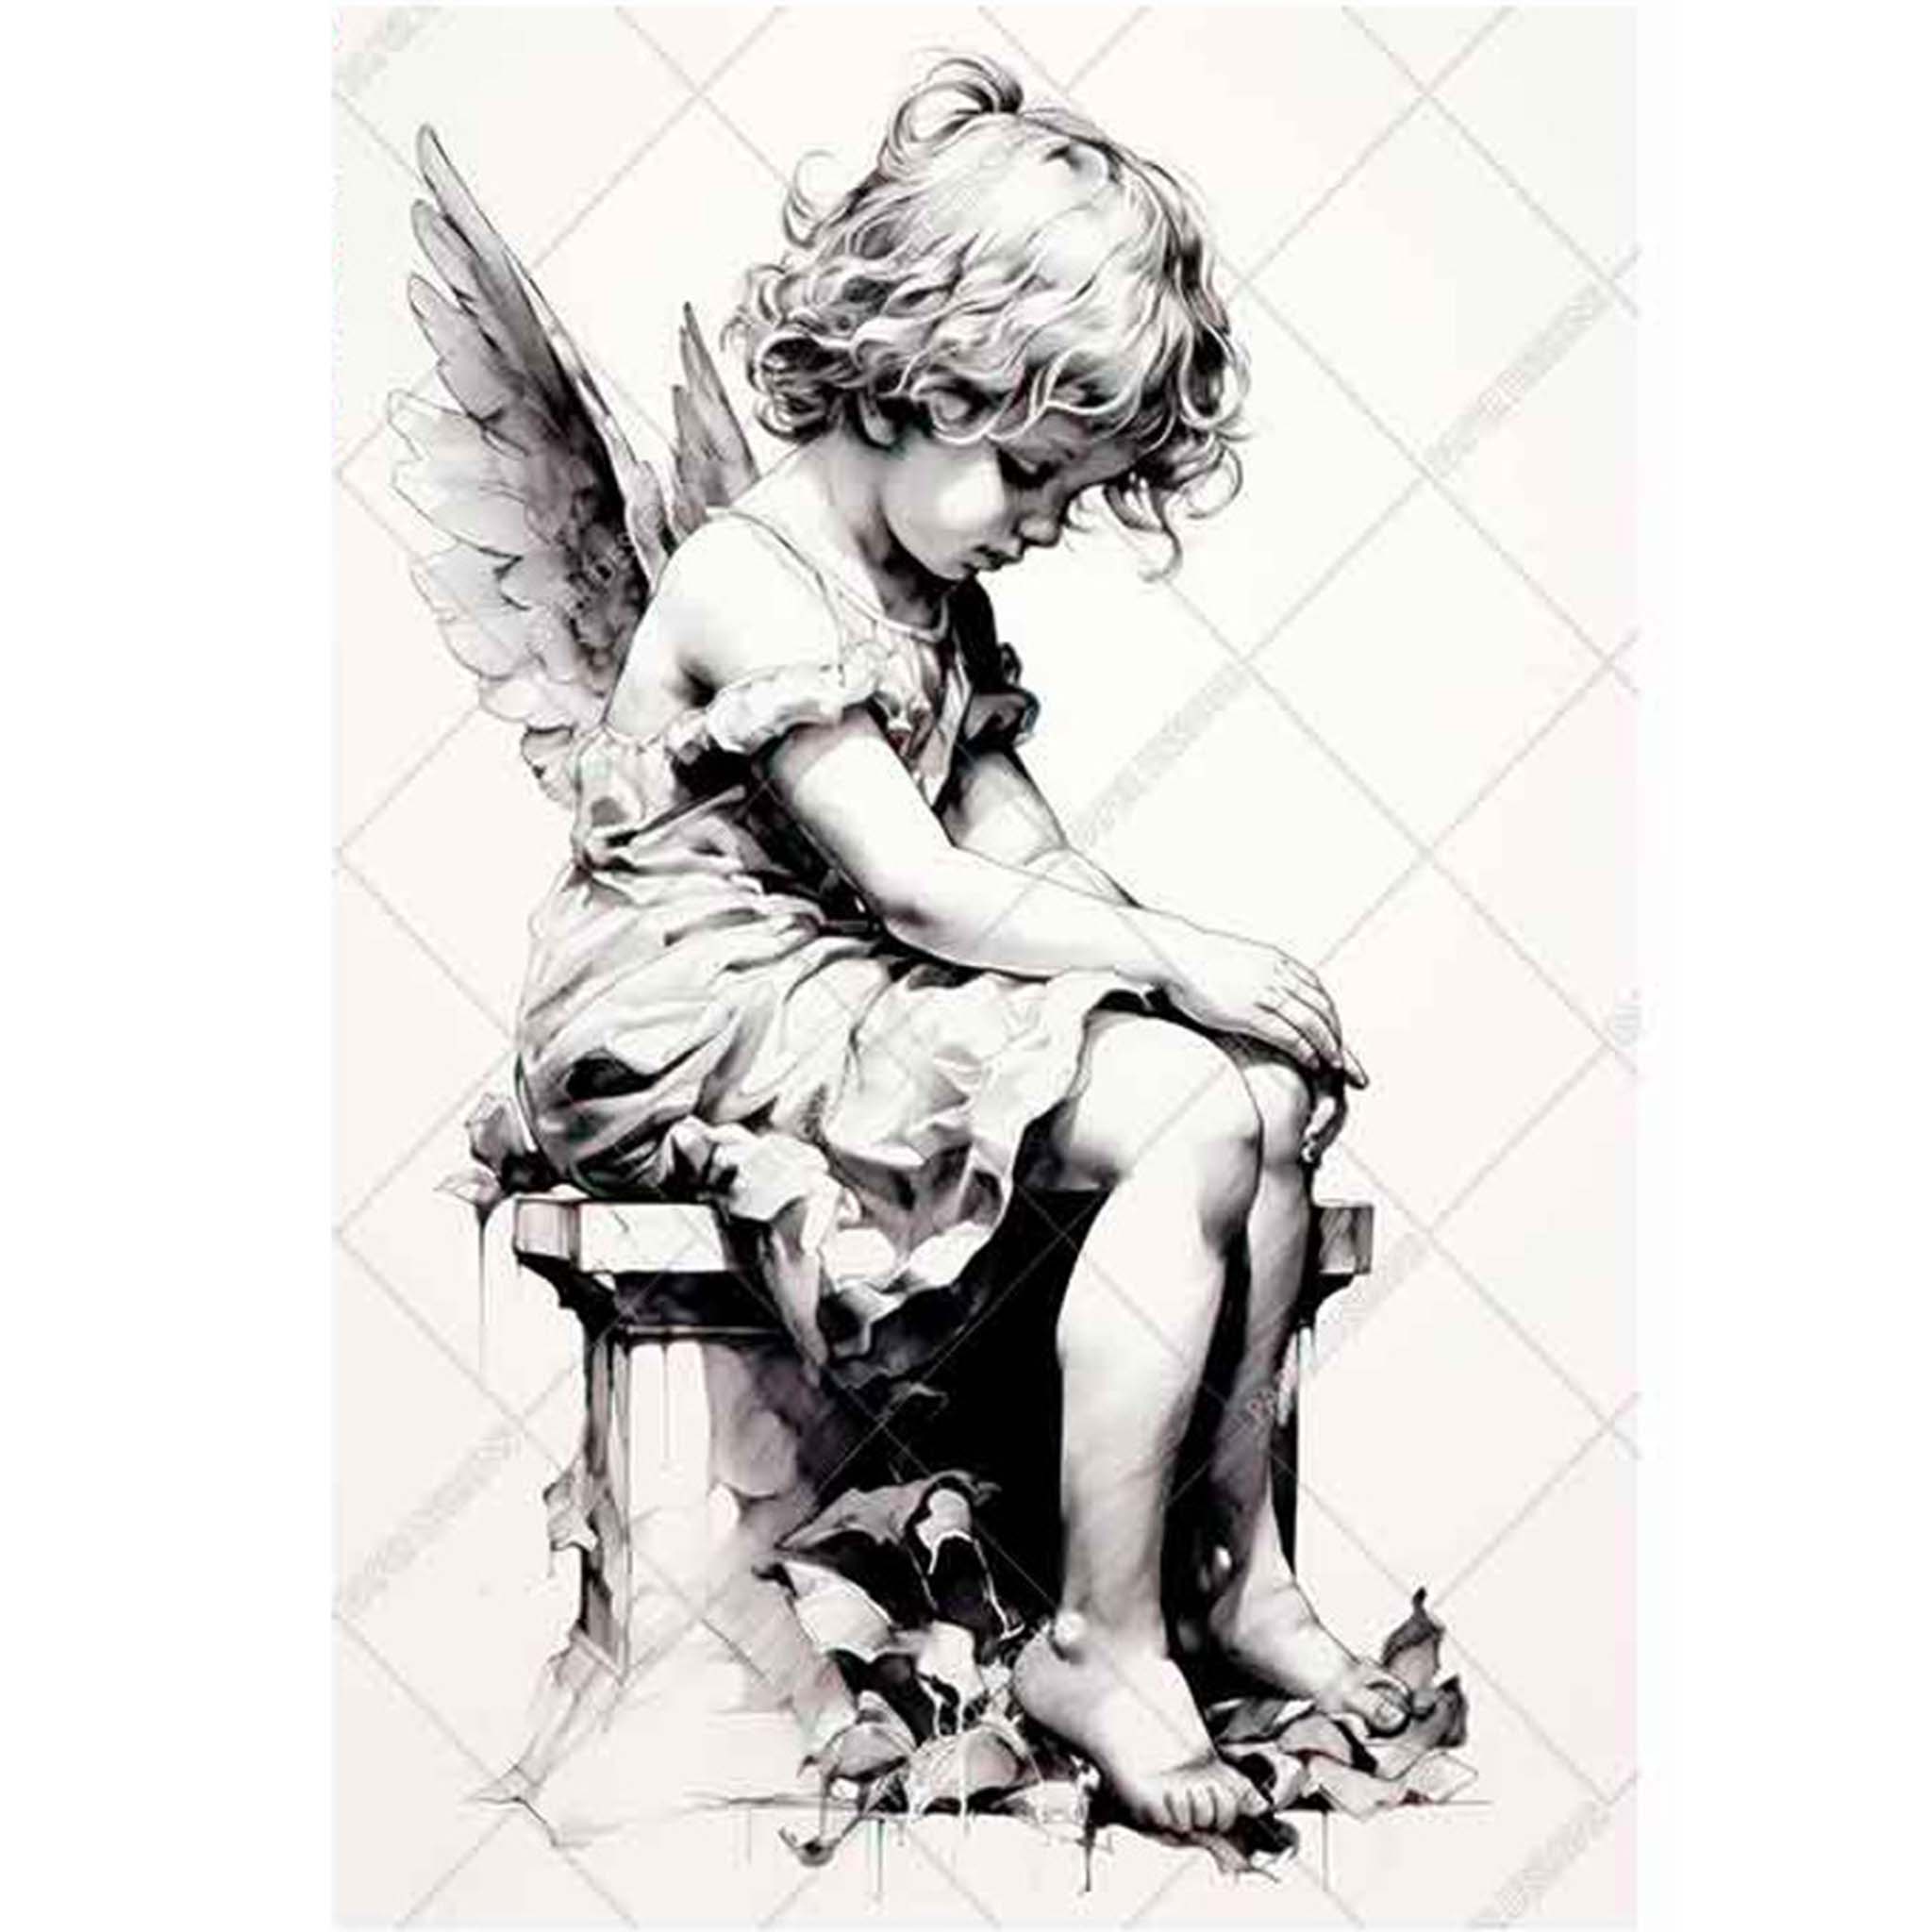 A4 rice paper design that features a beautiful sketch of a child angel sitting on a stone bench. White borders are on the sides.